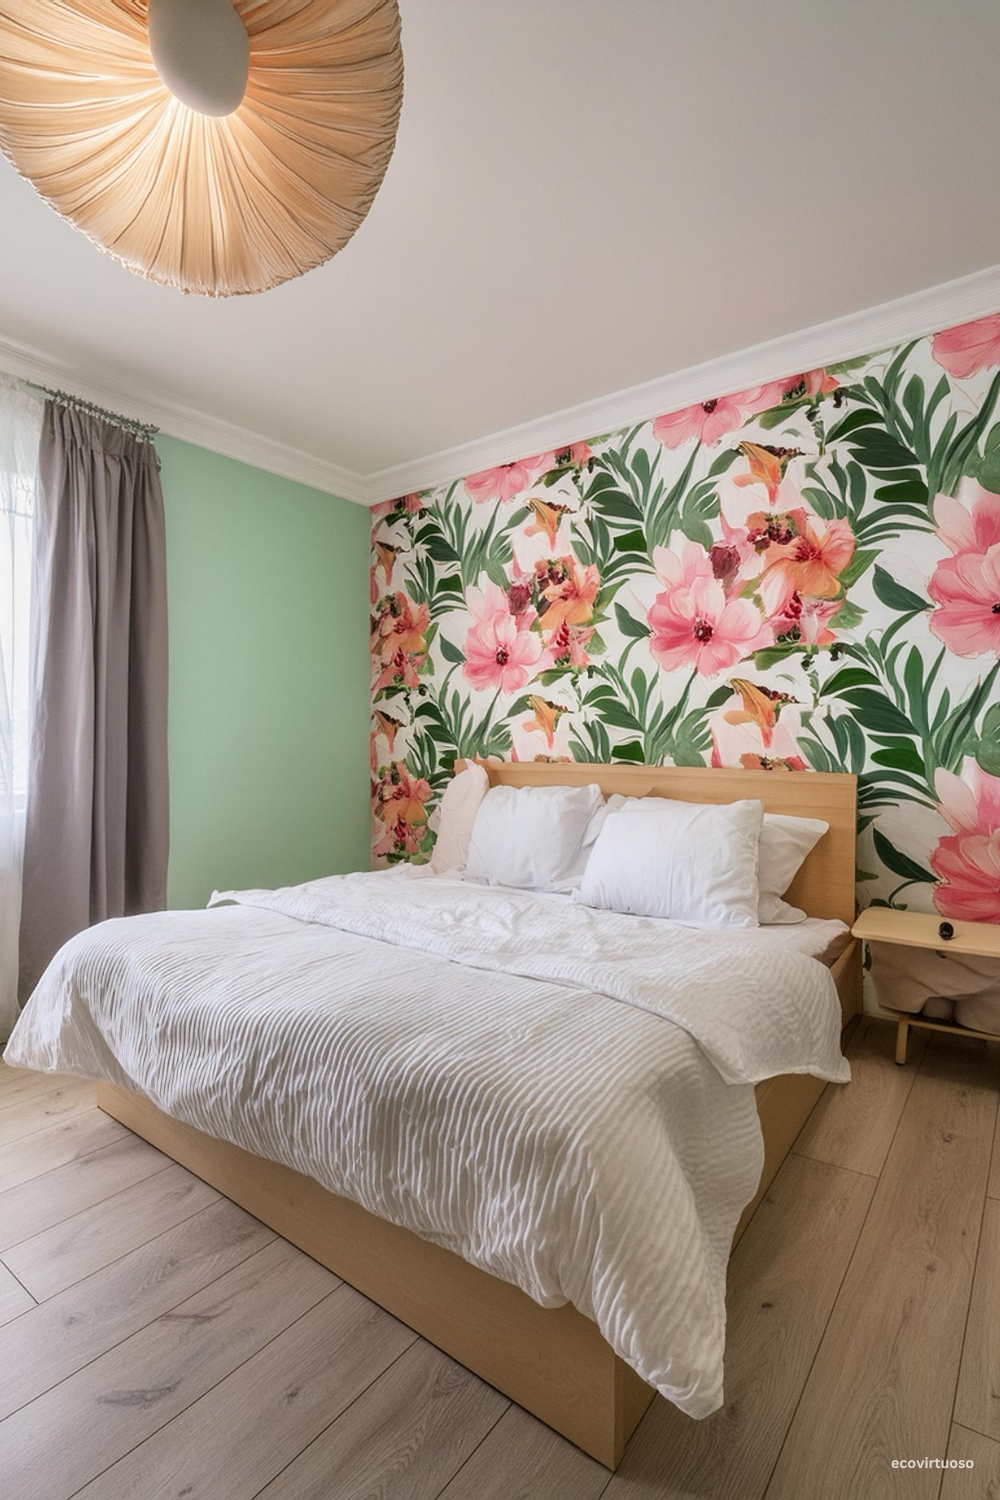 a bedroom with textured floral wall above it